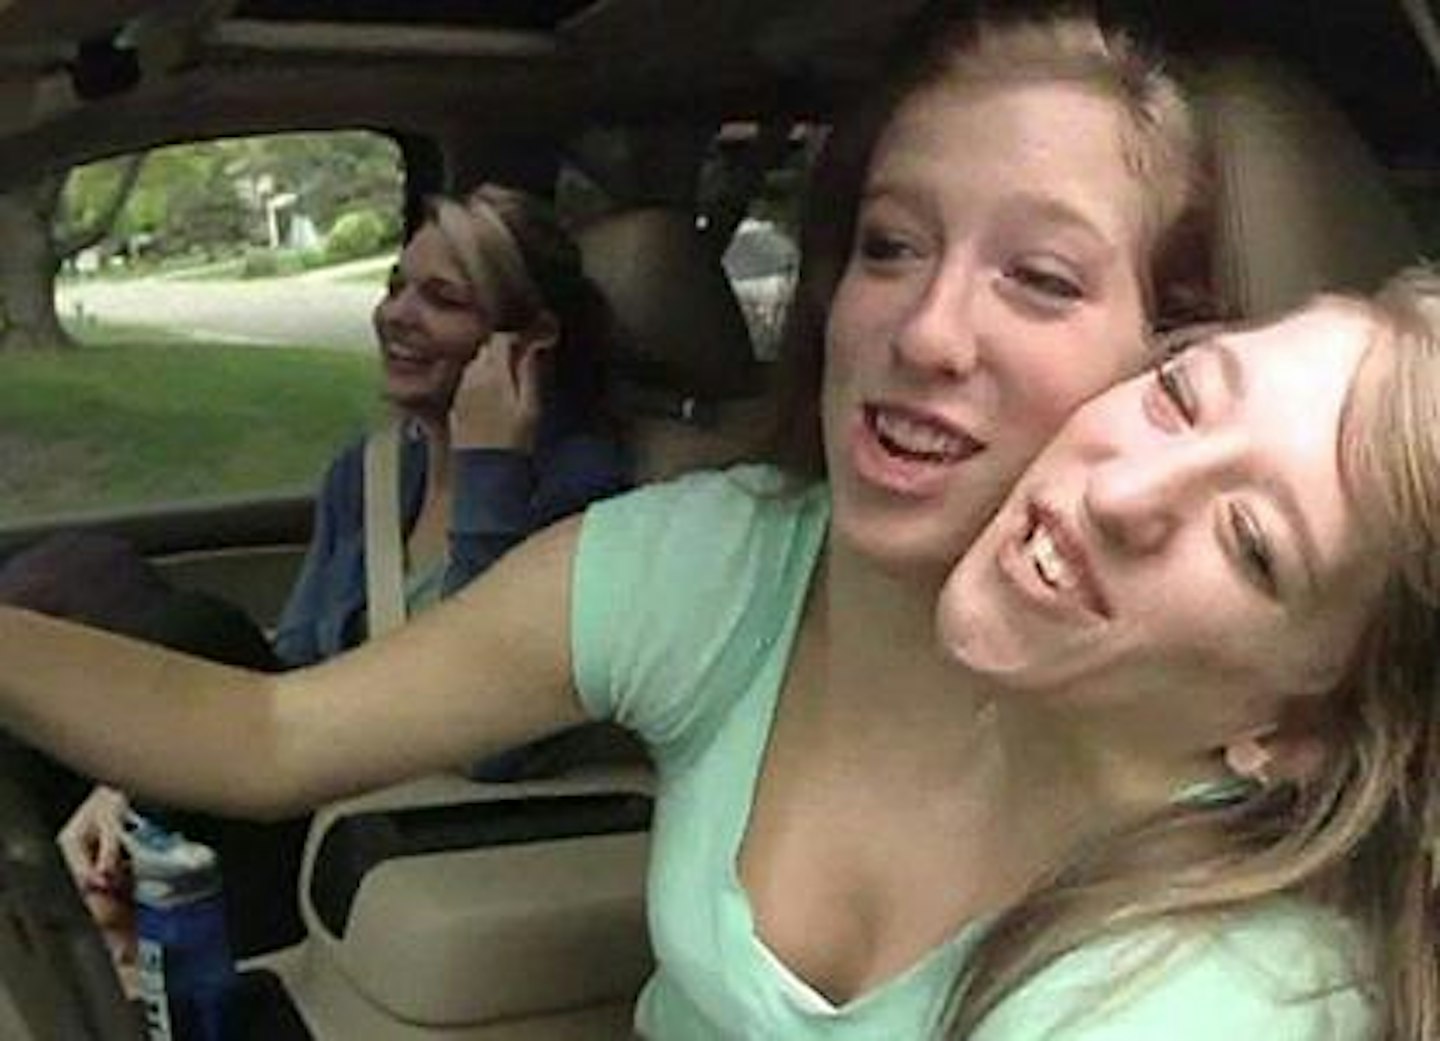 Conjoined twins Abby and Brittany Hensel: Where are they today